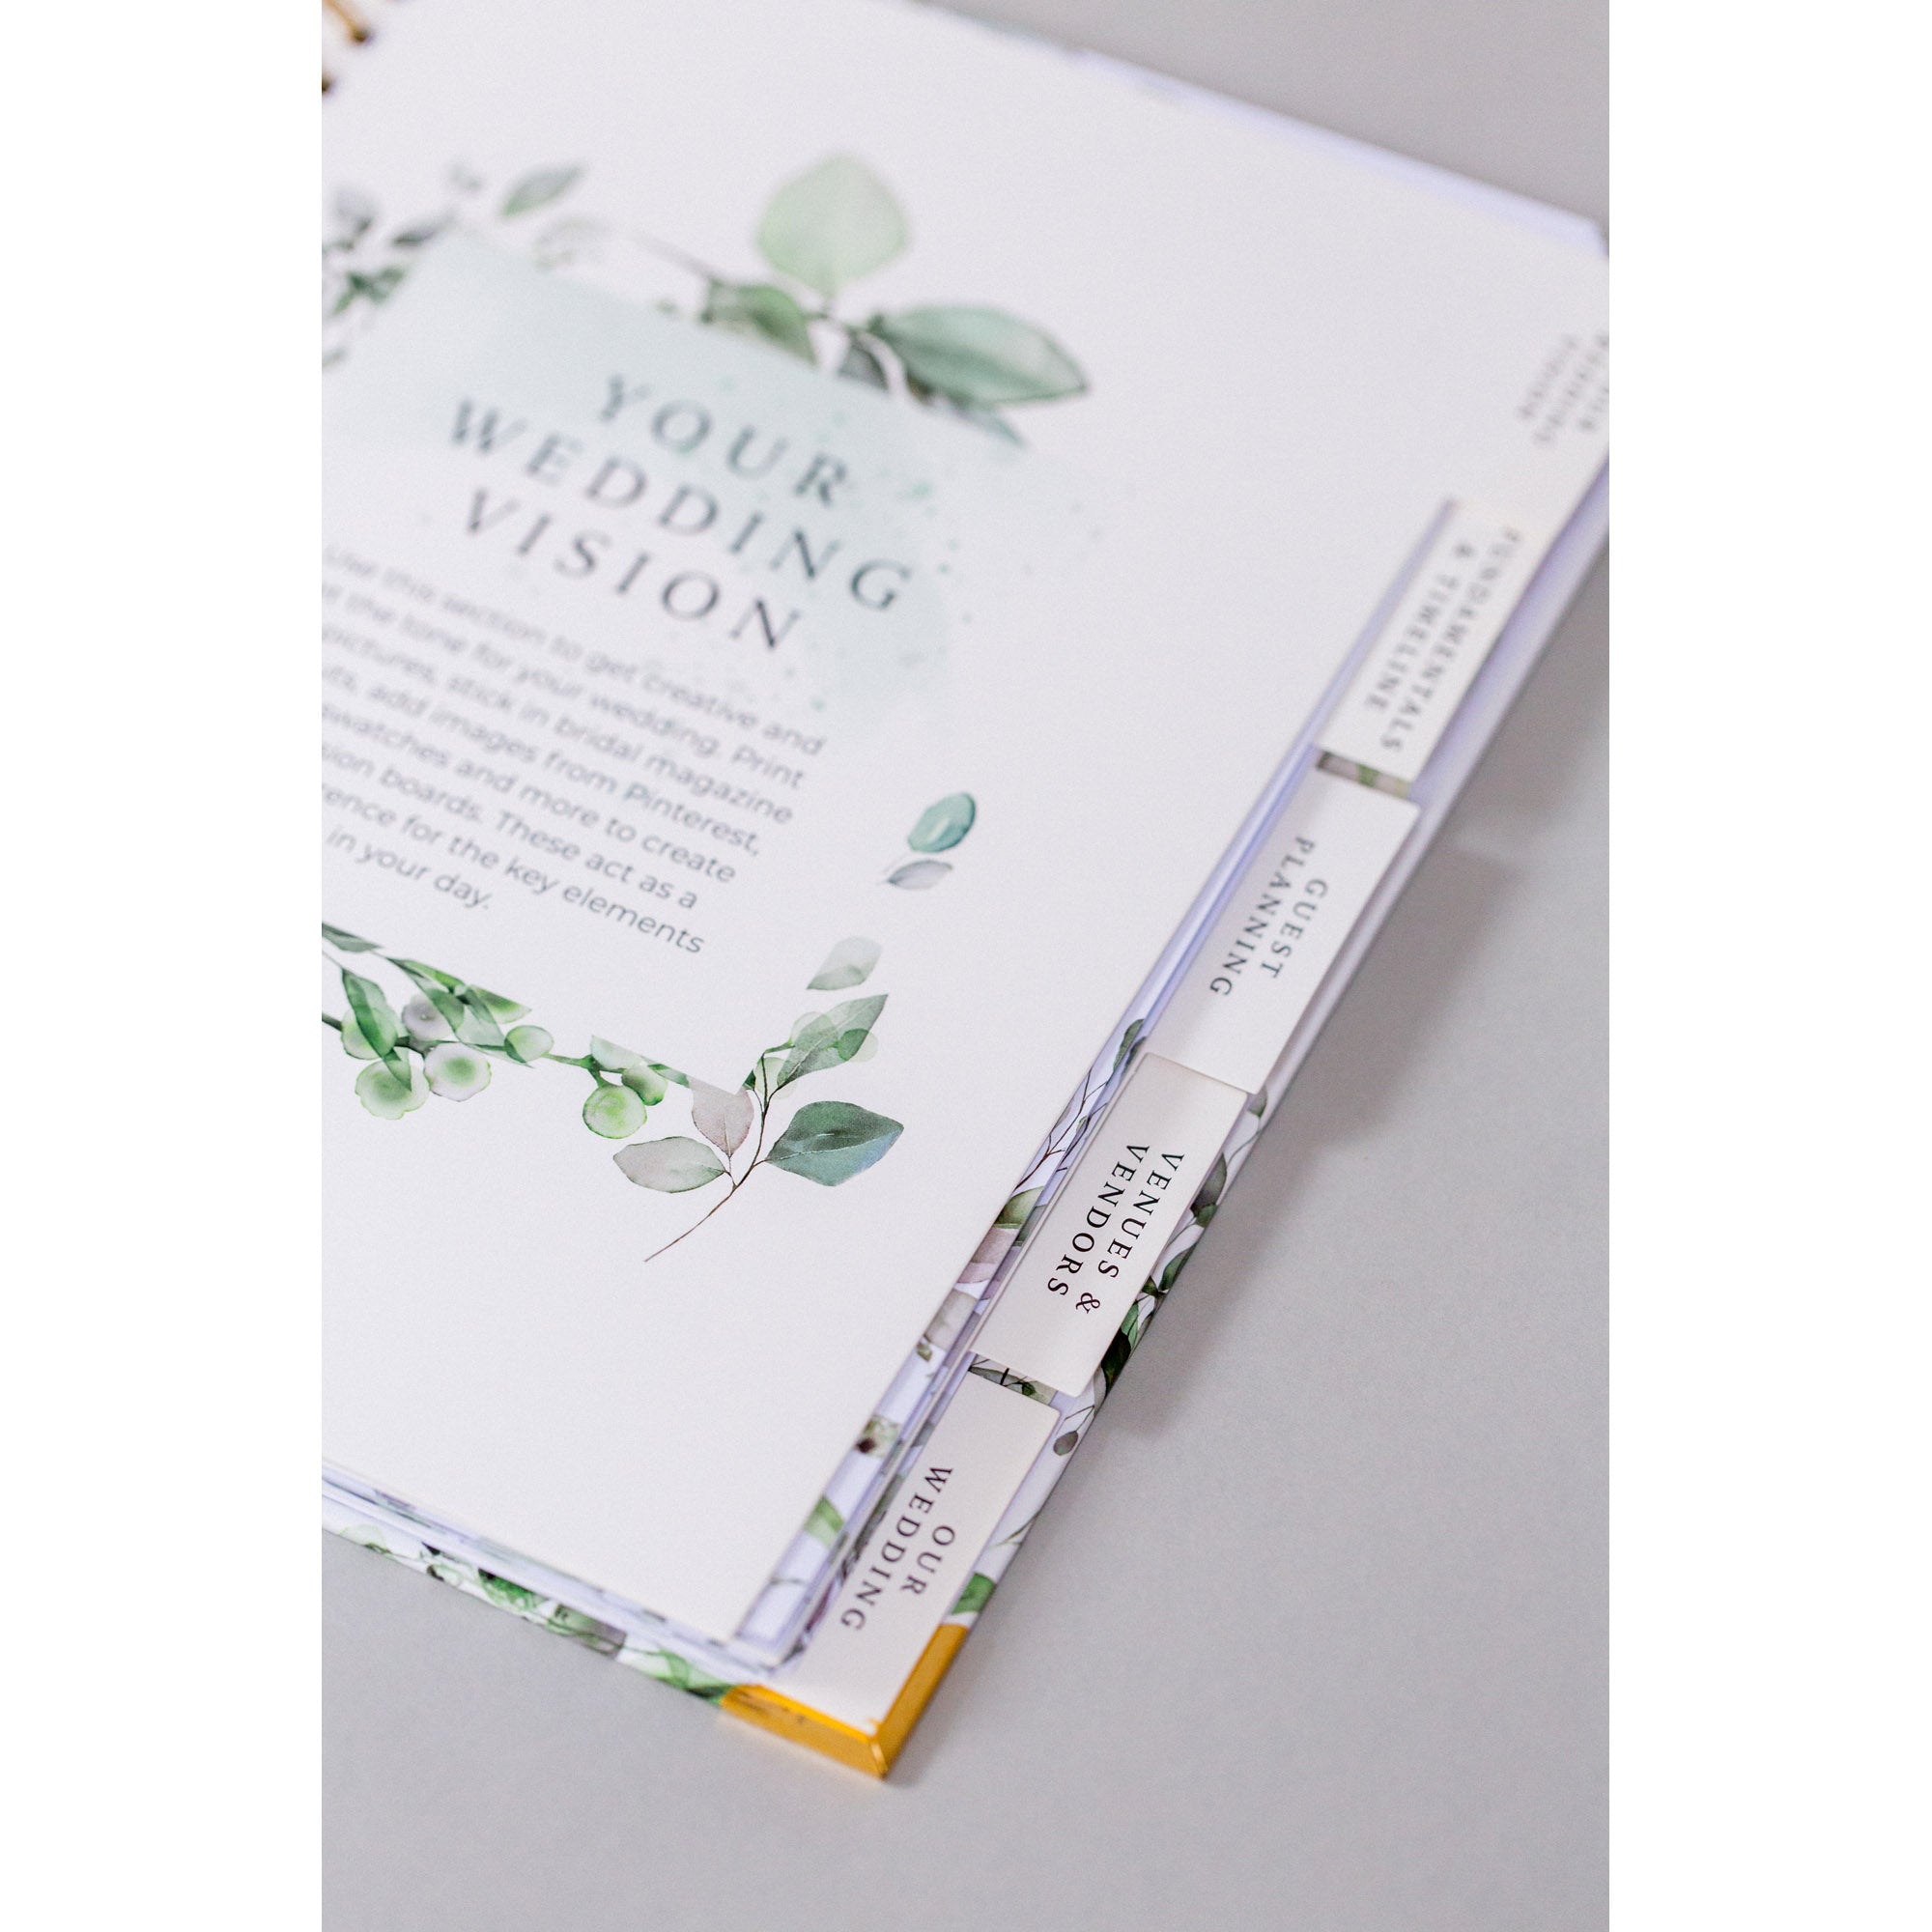 Wedding Planner & Organizer Book - USA / Canada - Floral Edition - Your  Perfect Day –